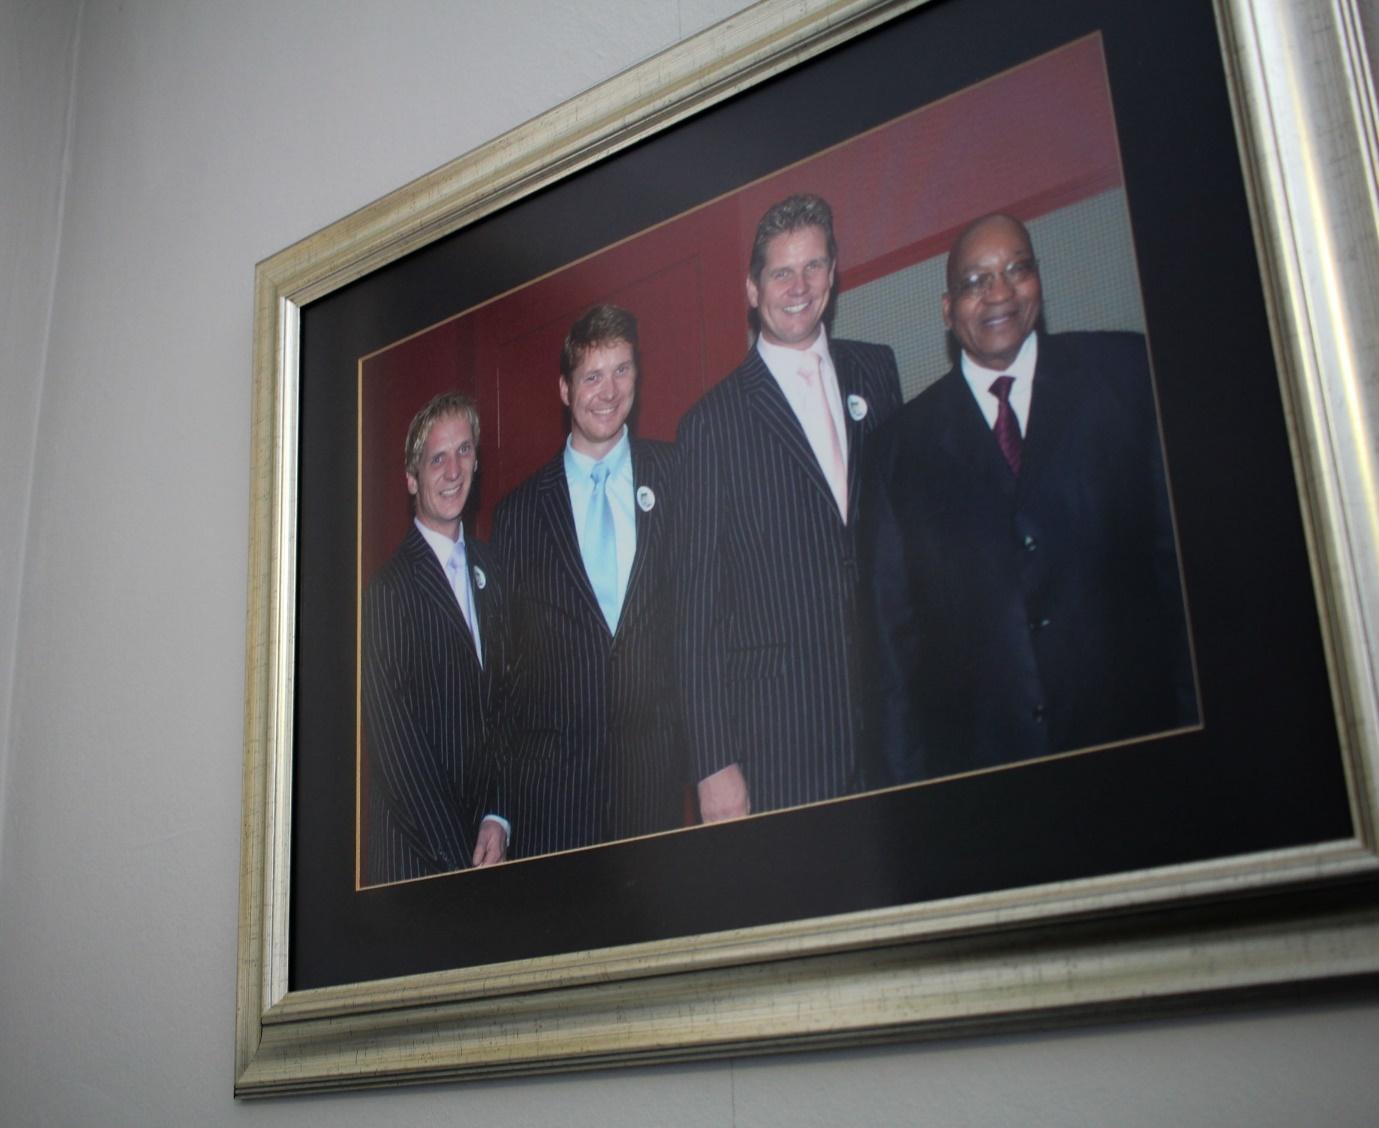 A framed picture of a group of people

Description automatically generated with medium confidence